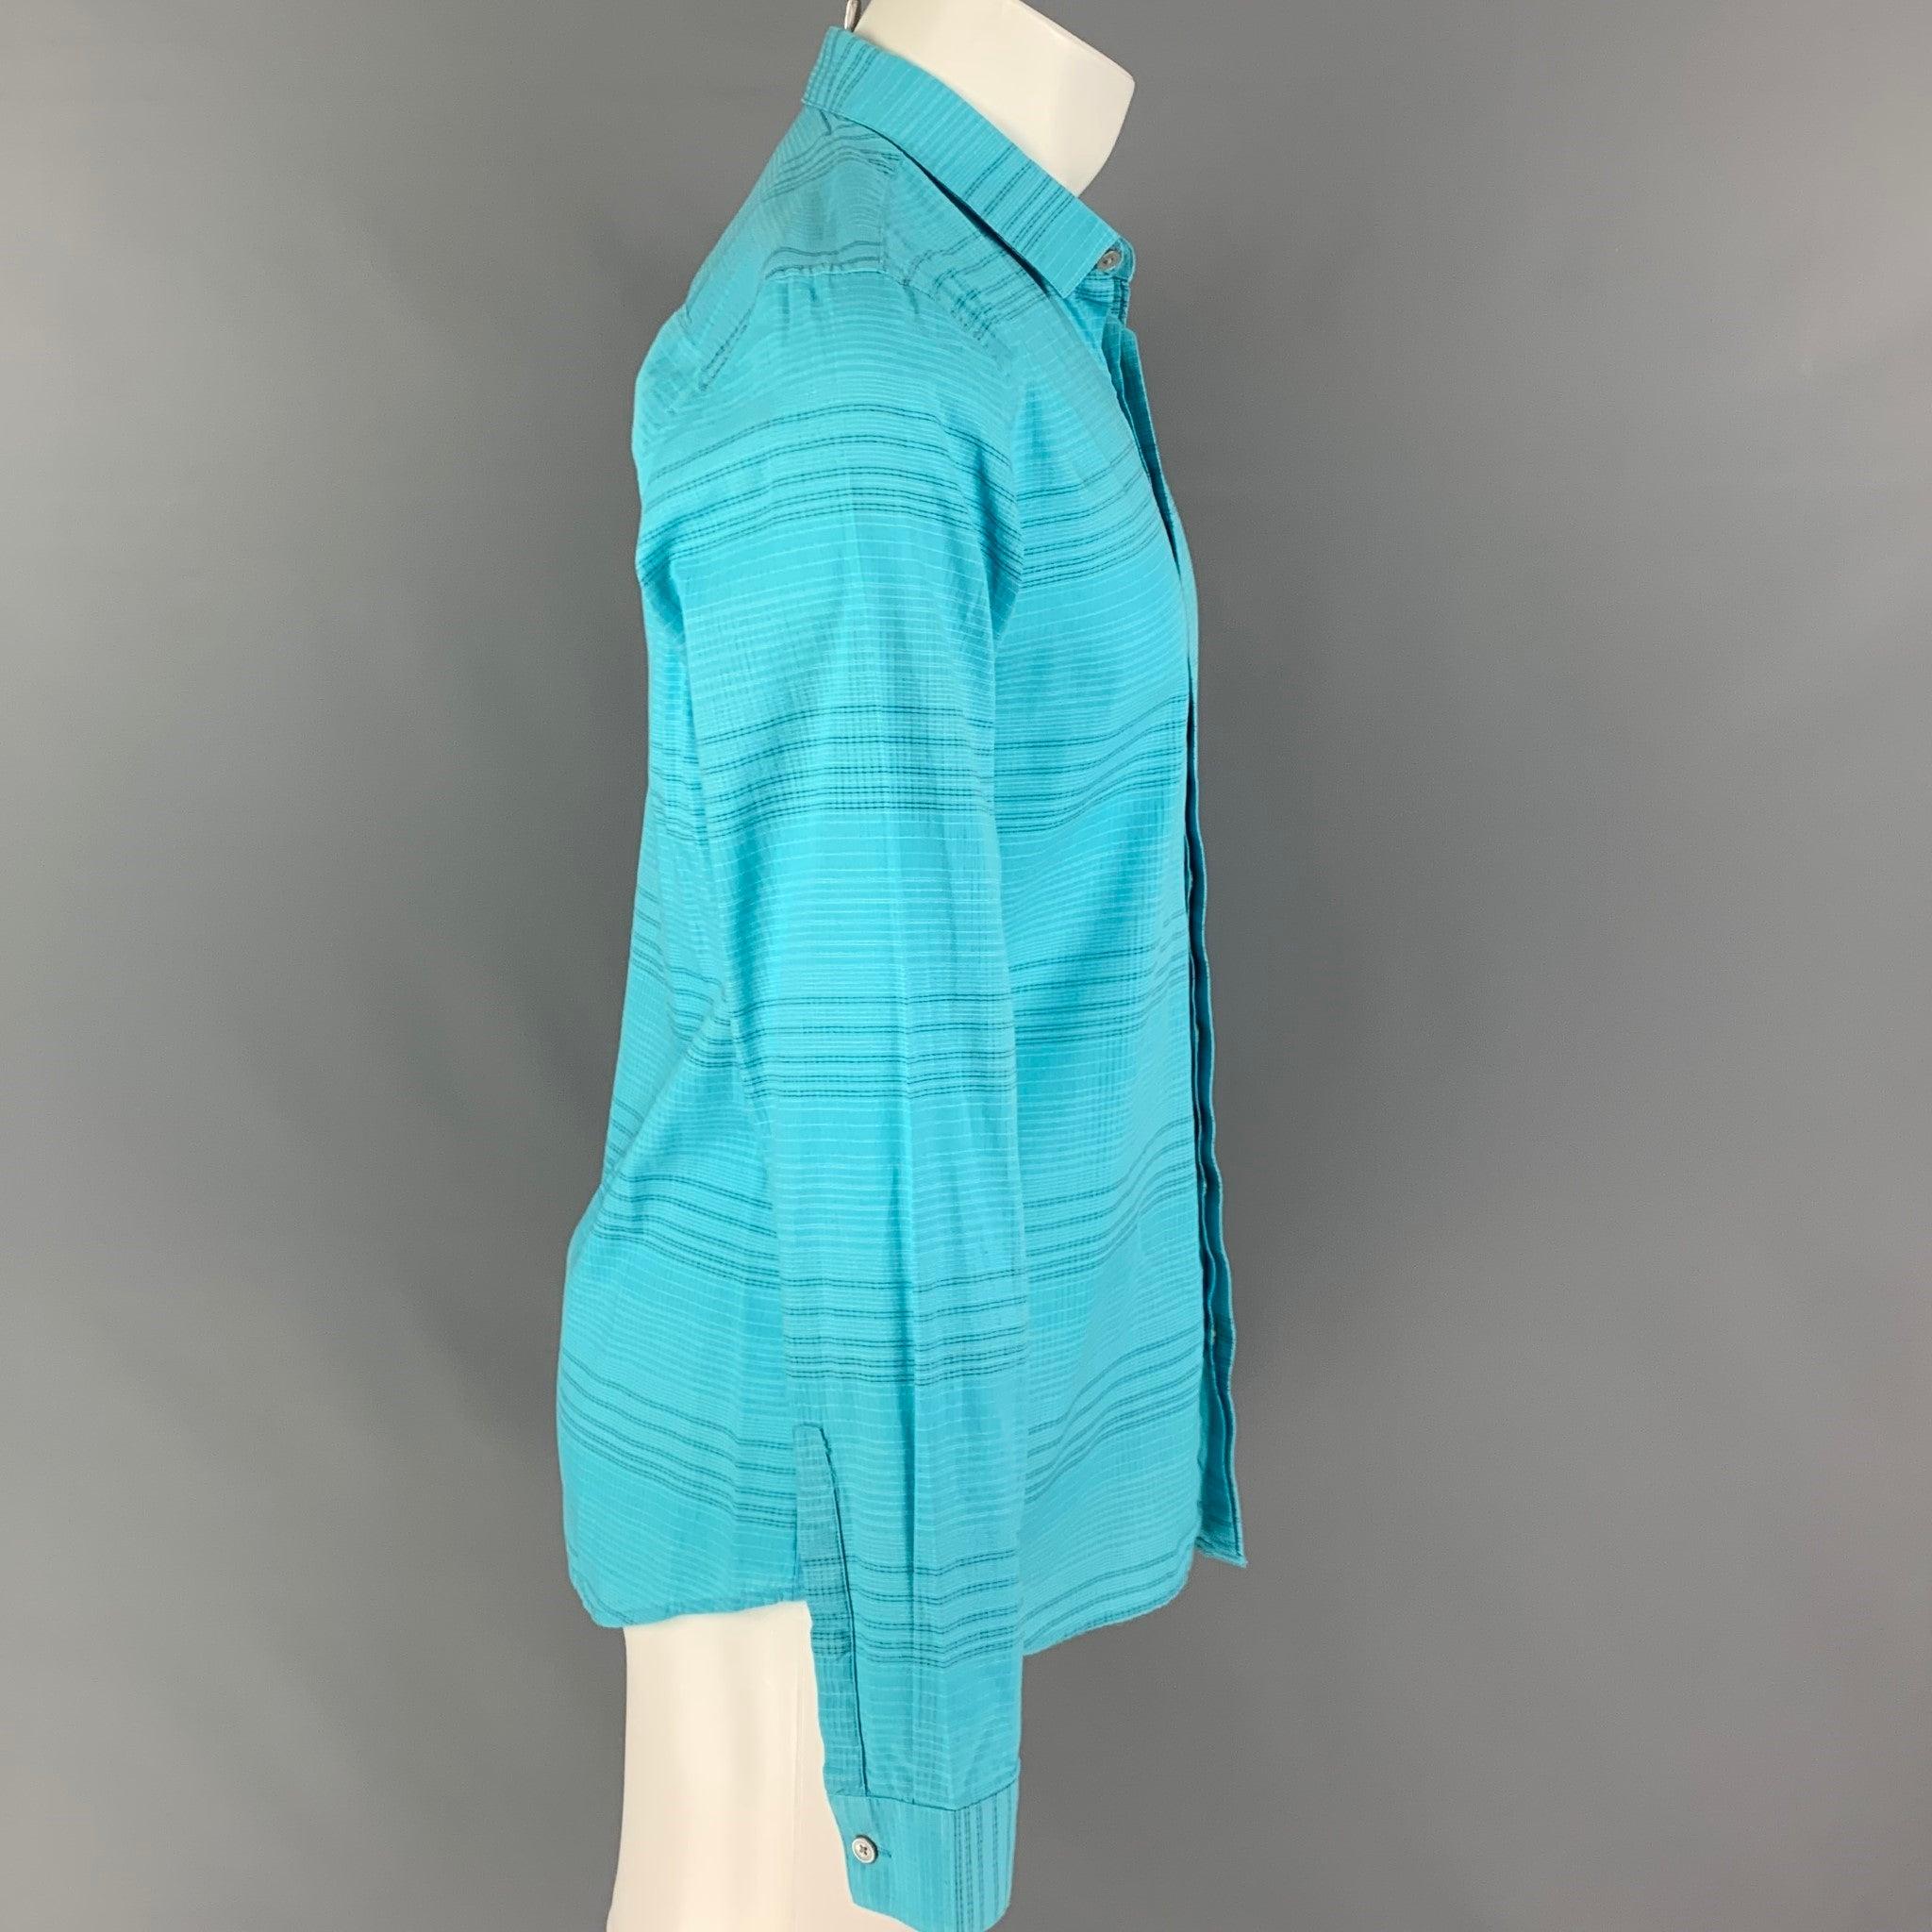 CALVIN KLEIN long sleeve shirt comes in a aqua grid cotton featuring a extra slim fit, spread collar, and a hidden placket closure.
Very Good
Pre-Owned Condition. 

Marked:   M  

Measurements: 
 
Shoulder:
16.5 inches  Chest: 38 inches  Sleeve: 26